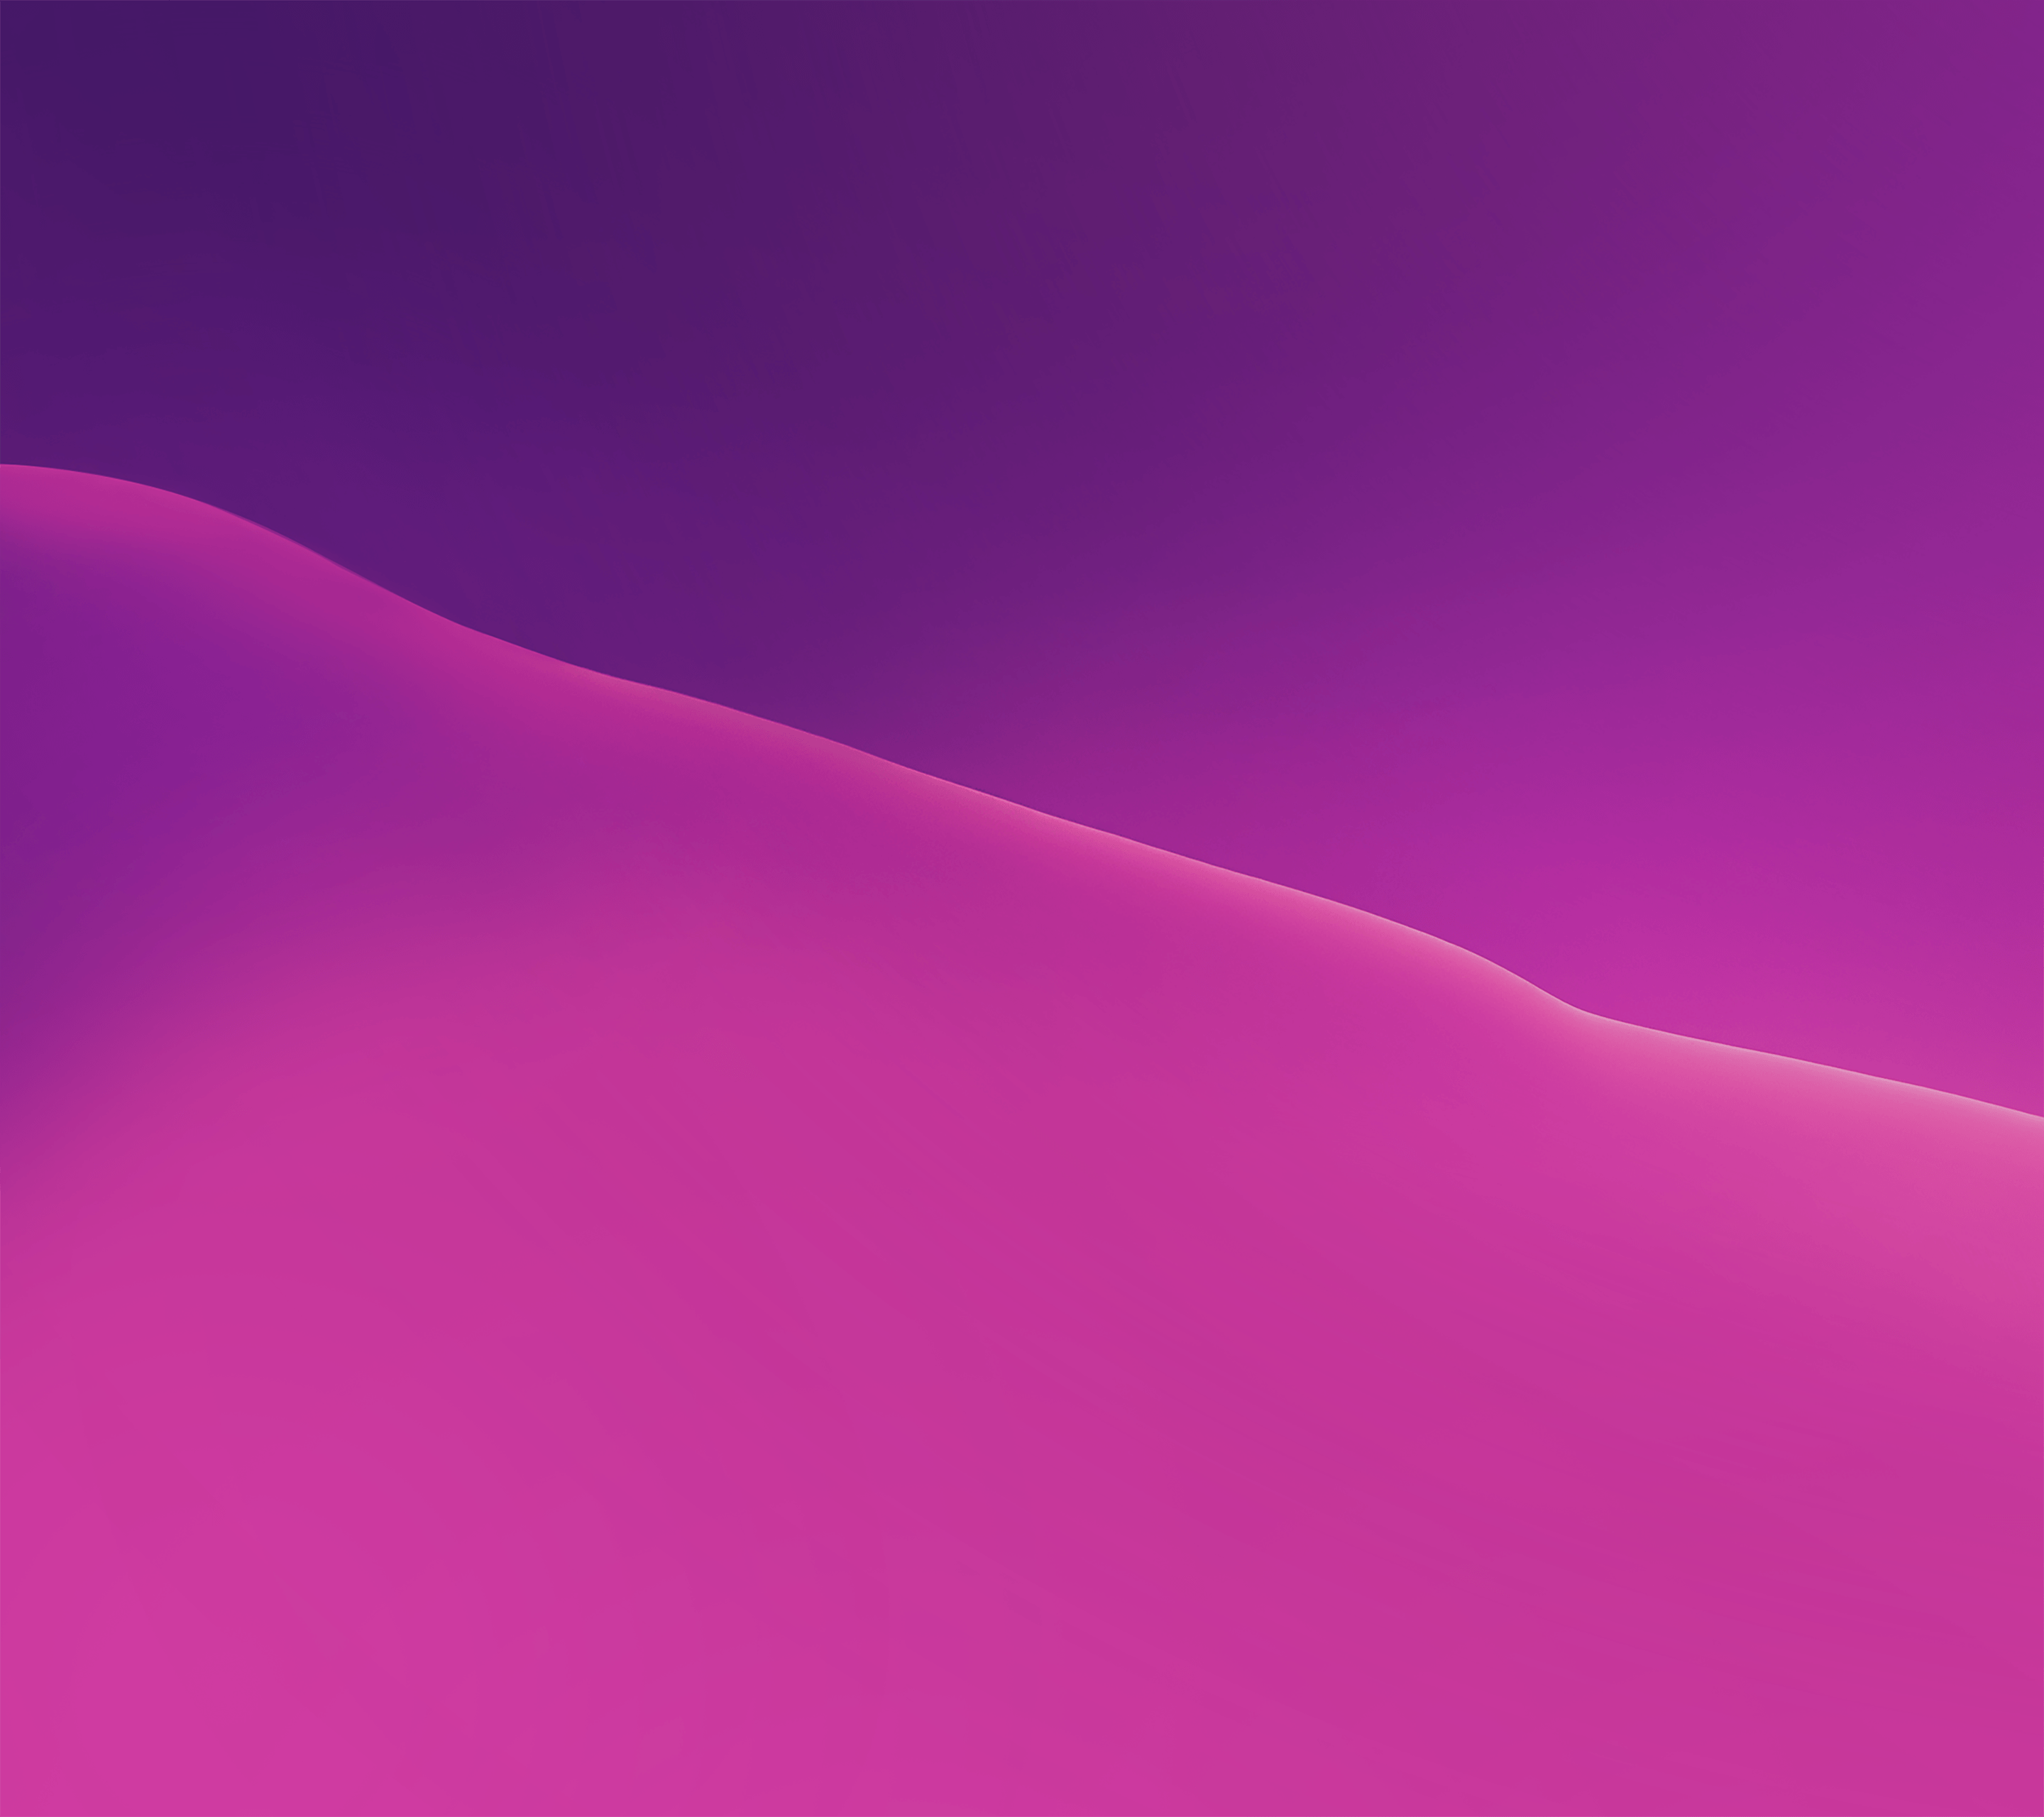 Download these beautiful Nexus wallpapers here